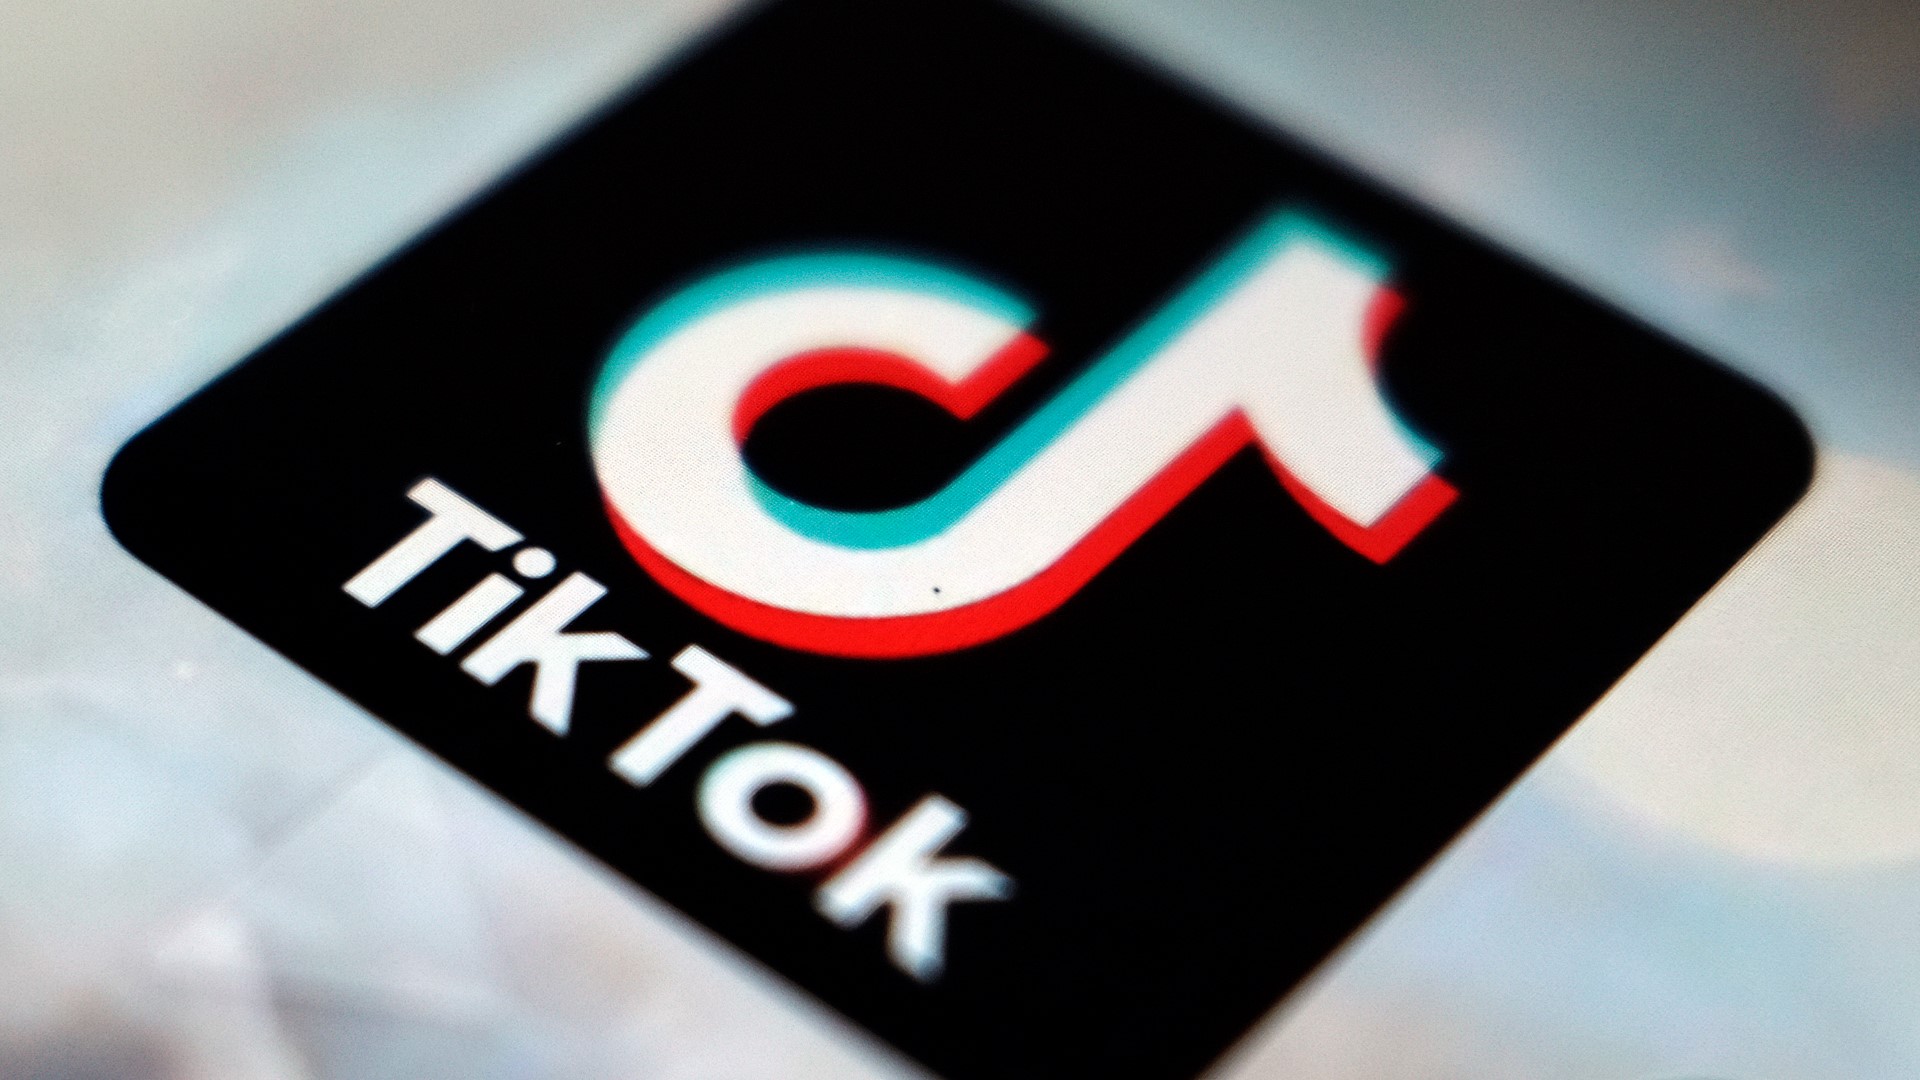 In the announcement, Youngkin called TikTok and WeChat data a quote "Channel to the Chinese Communist Party."